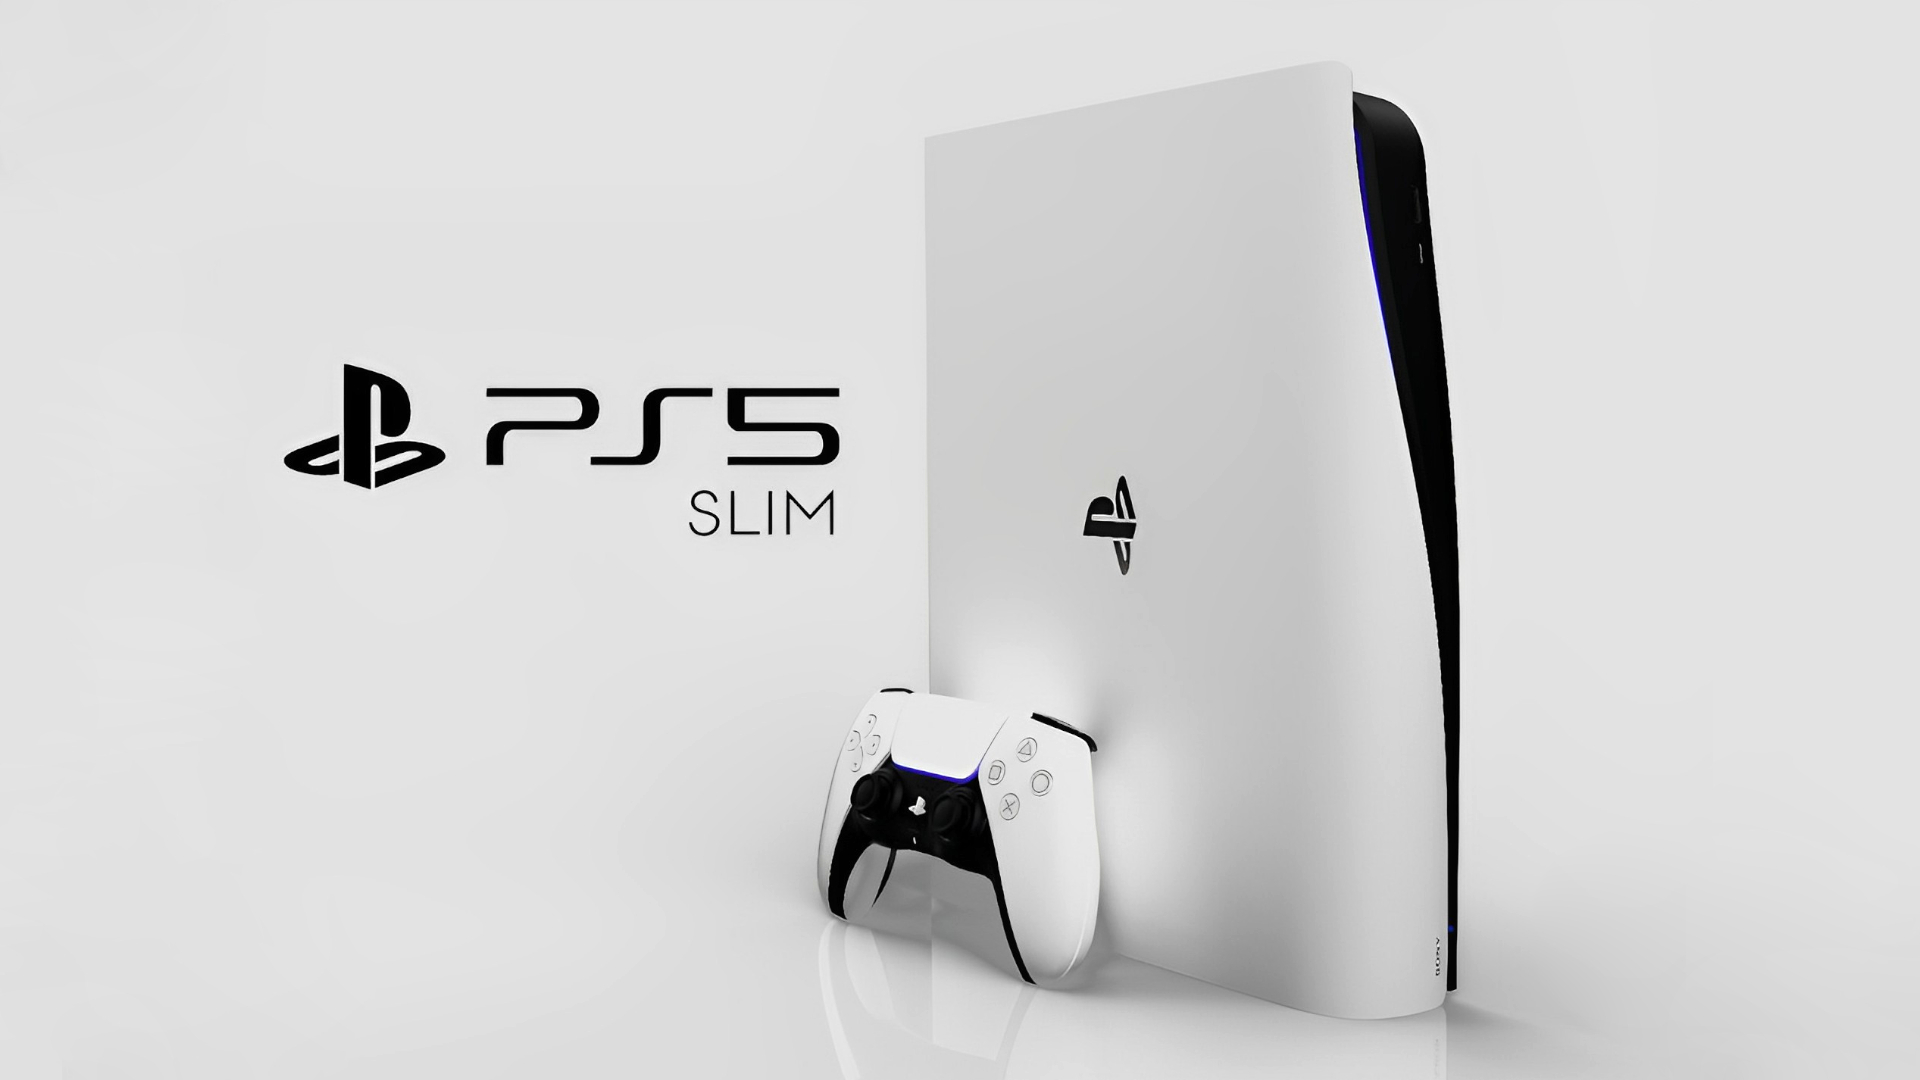 What does the PS5 Slim mean for Black Friday?